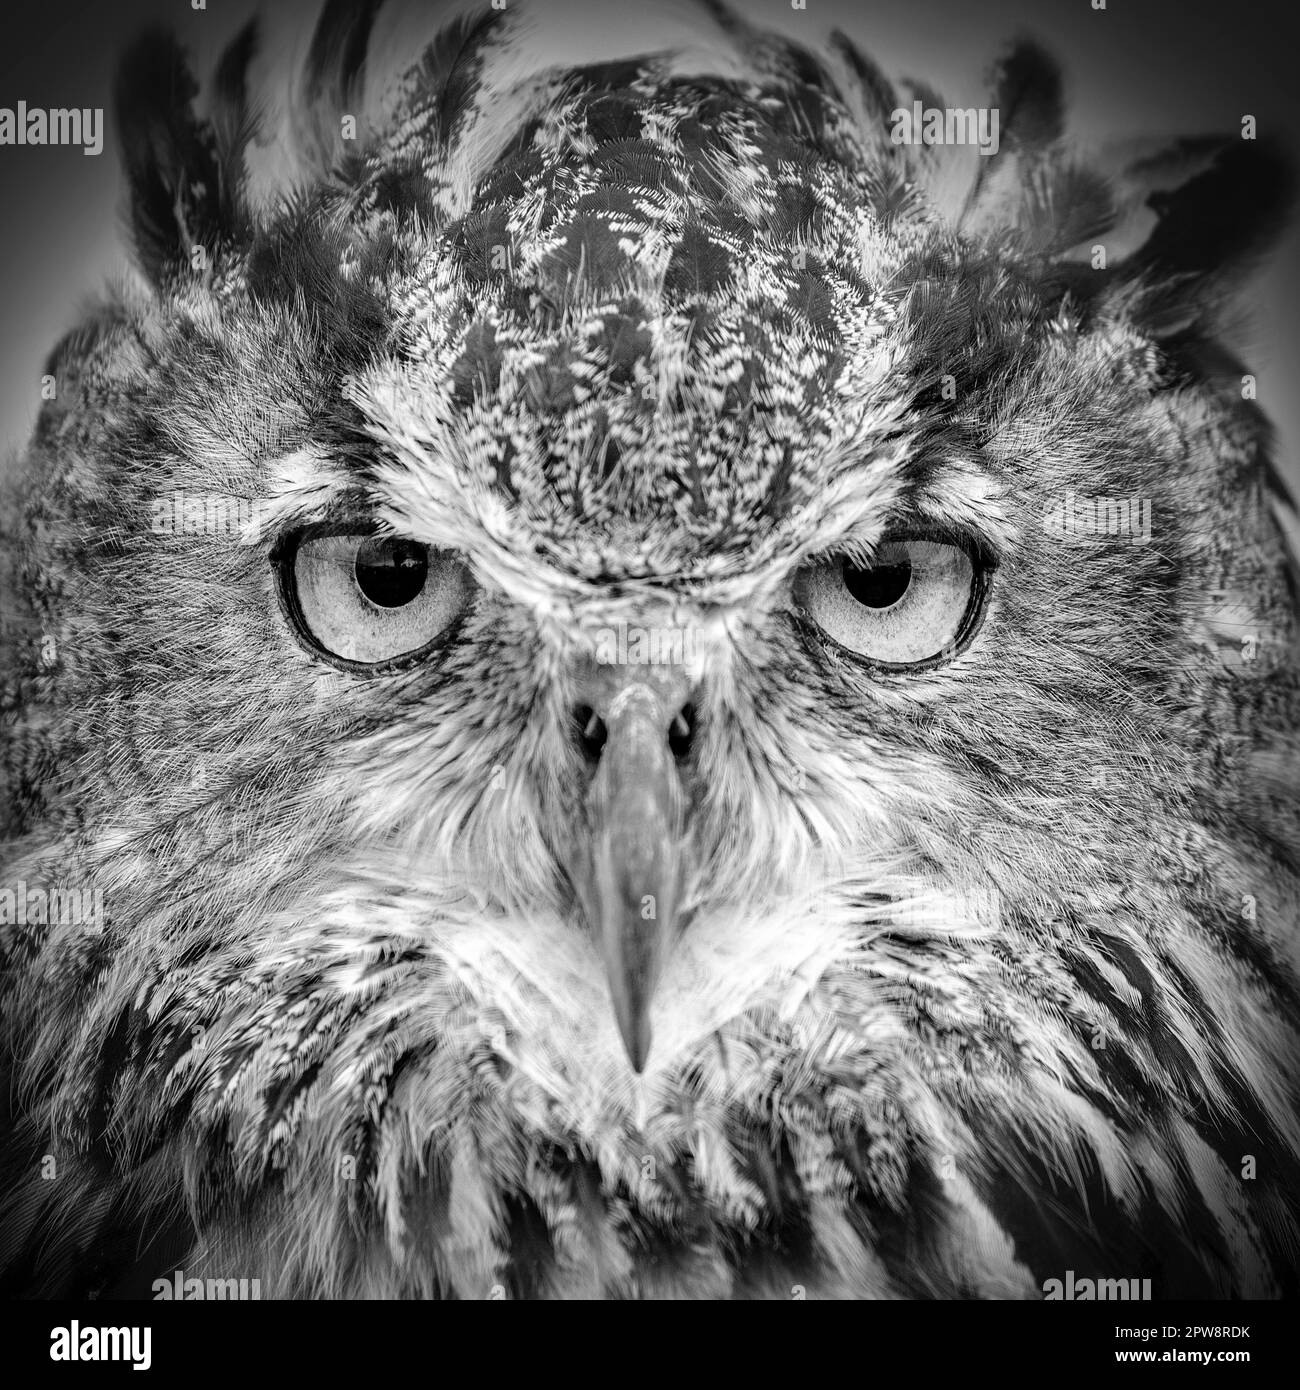 The Netherlands, Loosdrecht, Eagle-owl (Bubo bubo). Portrait. Controlled conditions. Black and White, Stock Photo